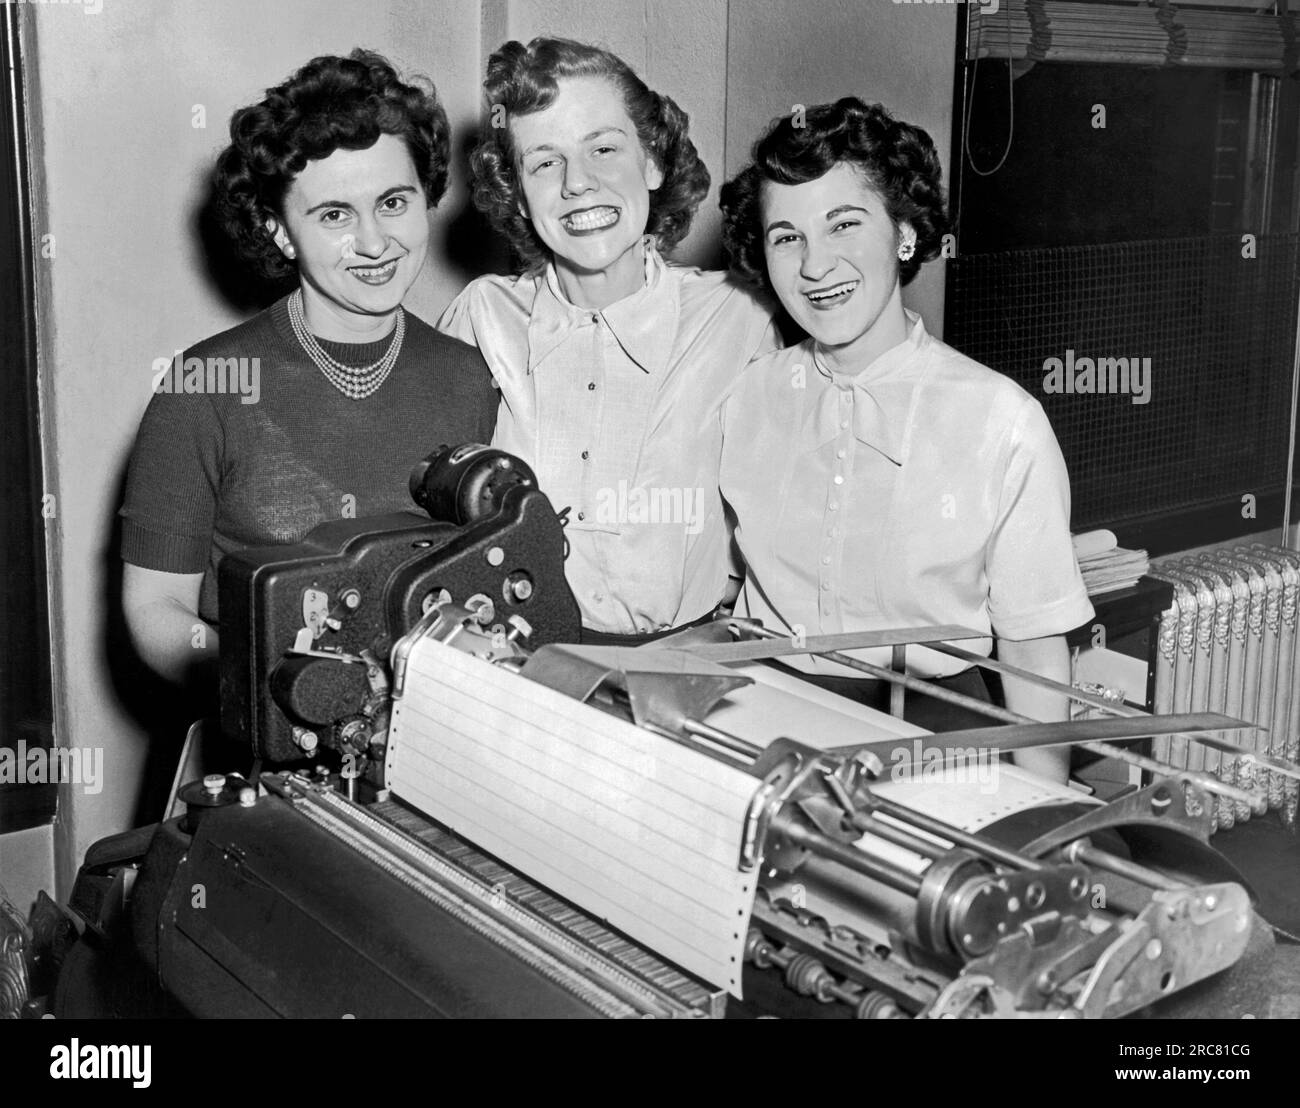 Cleveland, Ohio: February, 1951 Three smiling women office workers pose ...